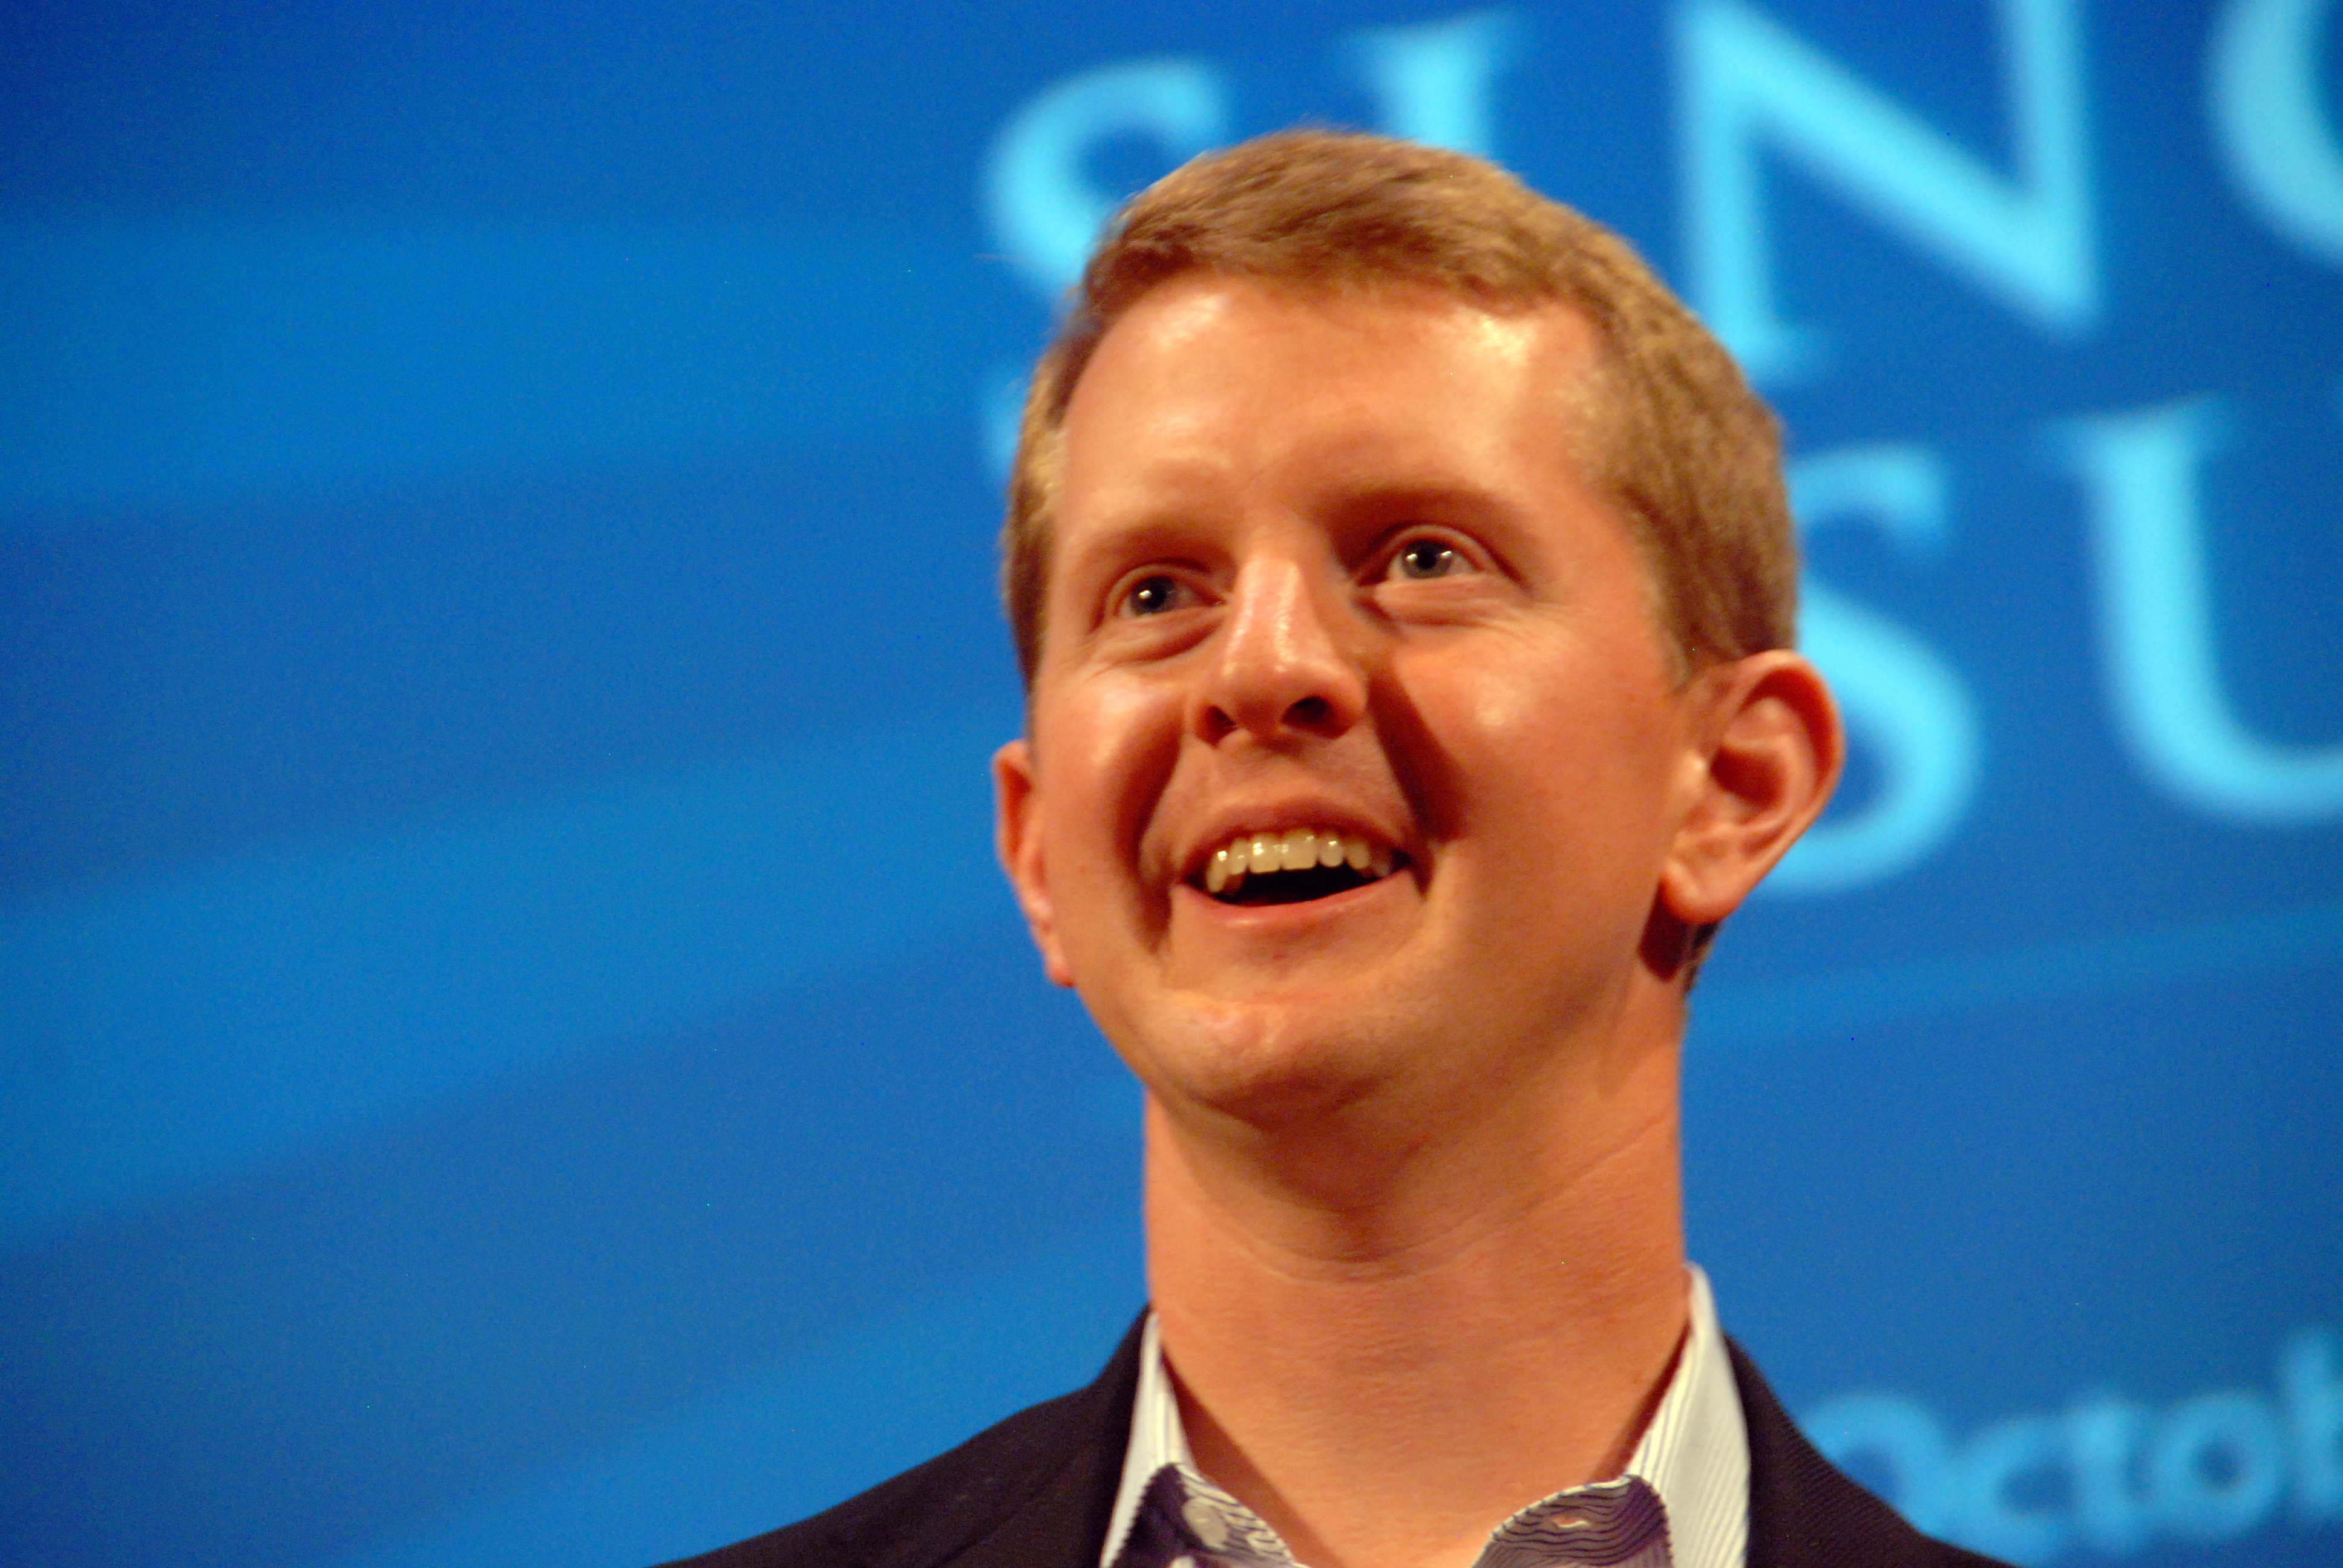 How Much Is Ken Jennings Net Worth From Jeopardy! & Other Shows?